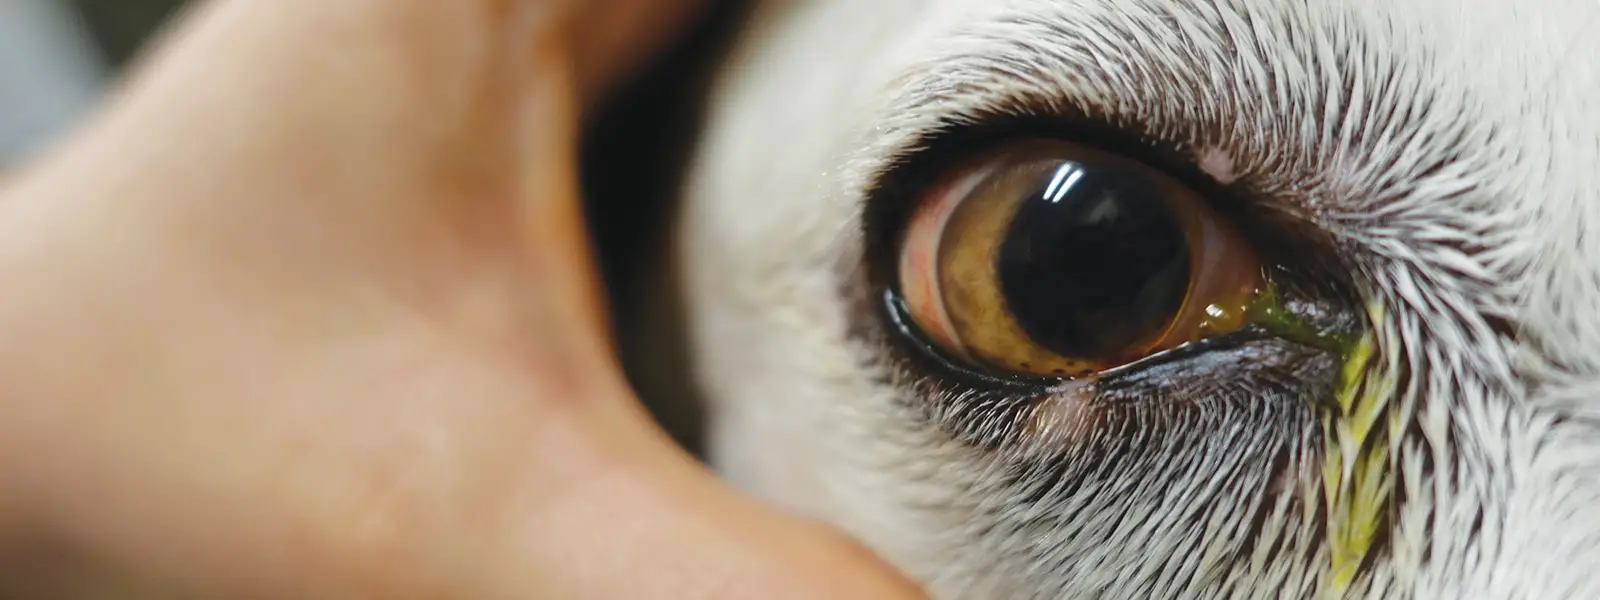 common diseases of the eye in dogs